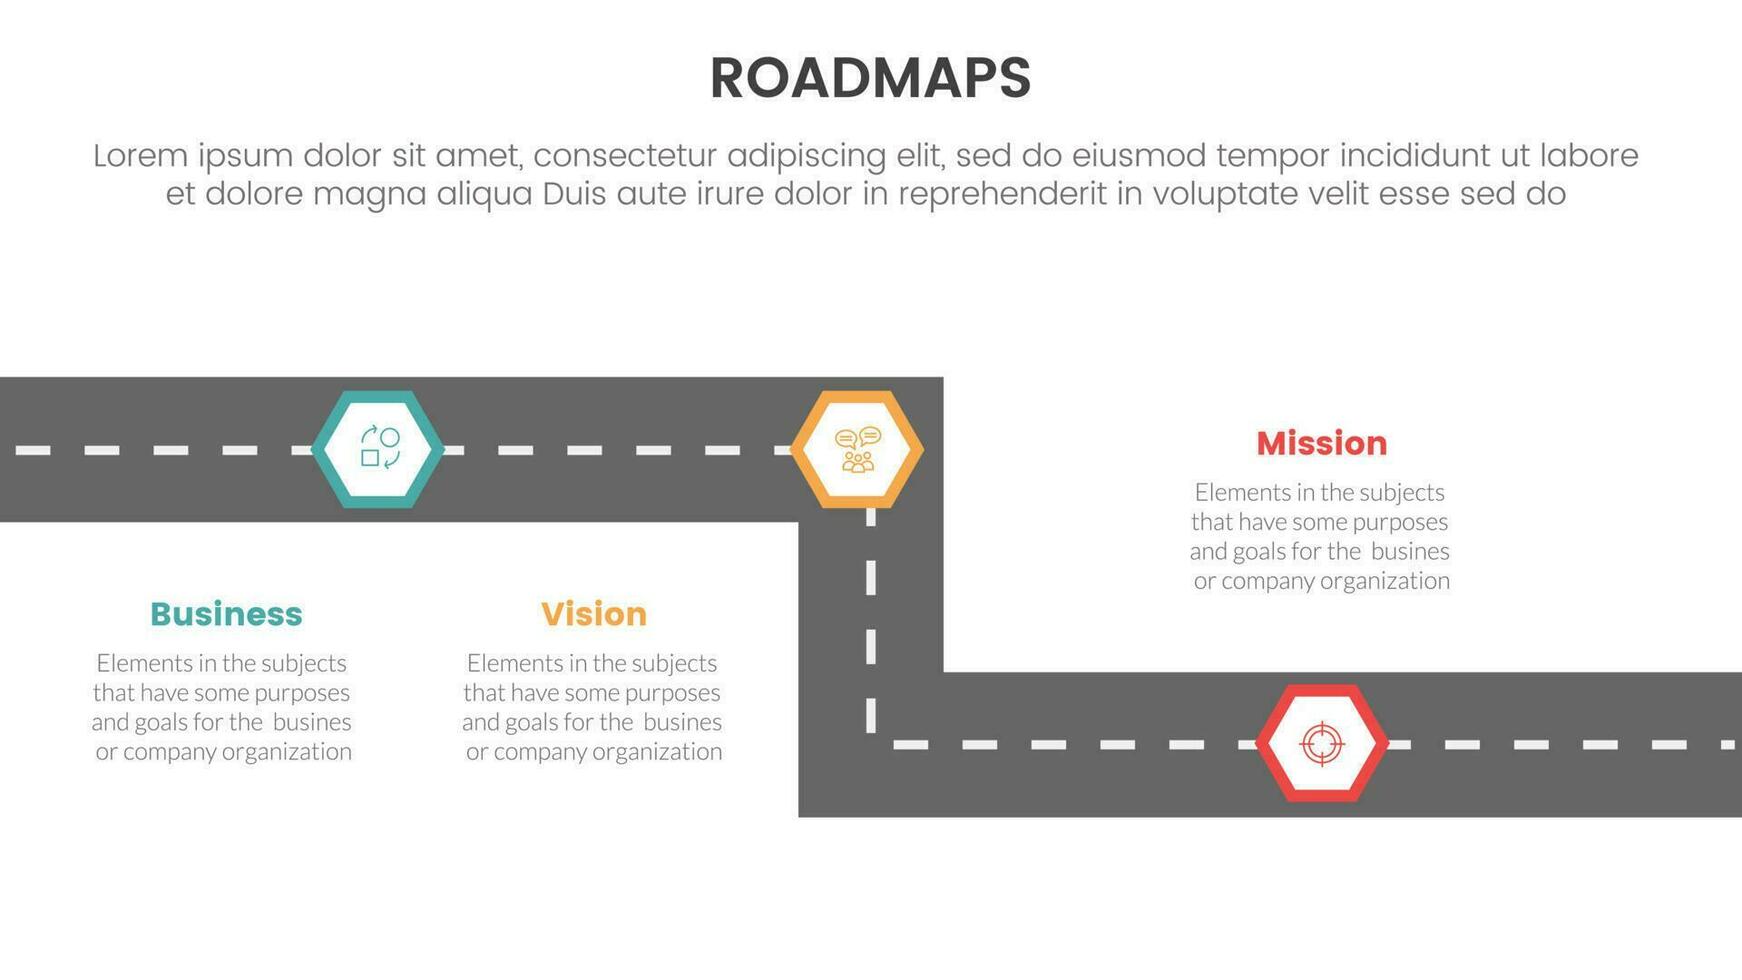 business roadmaps process framework infographic 3 stages with straight road way honeycomb shape and light theme concept for slide presentation vector